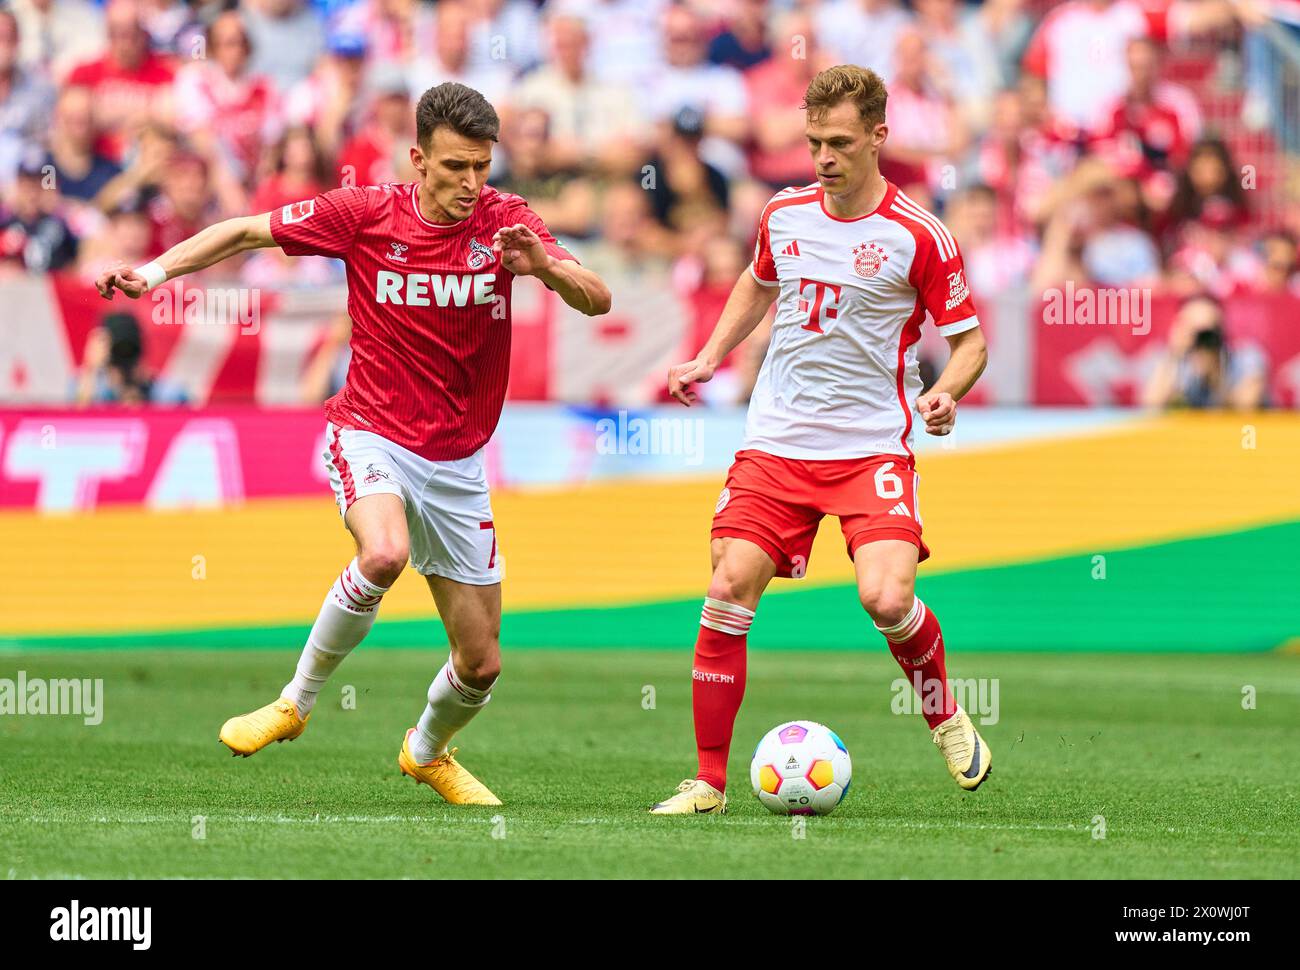 Joshua KIMMICH, FCB 6   compete for the ball, tackling, duel, header, zweikampf, action, fight against Dejan Ljubicic, 1.FCK 7   in the match  FC BAYERN MUENCHEN - 1.FC KOeLN 2-0   on April 13, 2024 in Munich, Germany. Season 2023/2024, 1.Bundesliga, FCB,, Muenchen, matchday 29, 29.Spieltag Photographer: ddp images / star-images    - DFL REGULATIONS PROHIBIT ANY USE OF PHOTOGRAPHS as IMAGE SEQUENCES and/or QUASI-VIDEO - Stock Photo